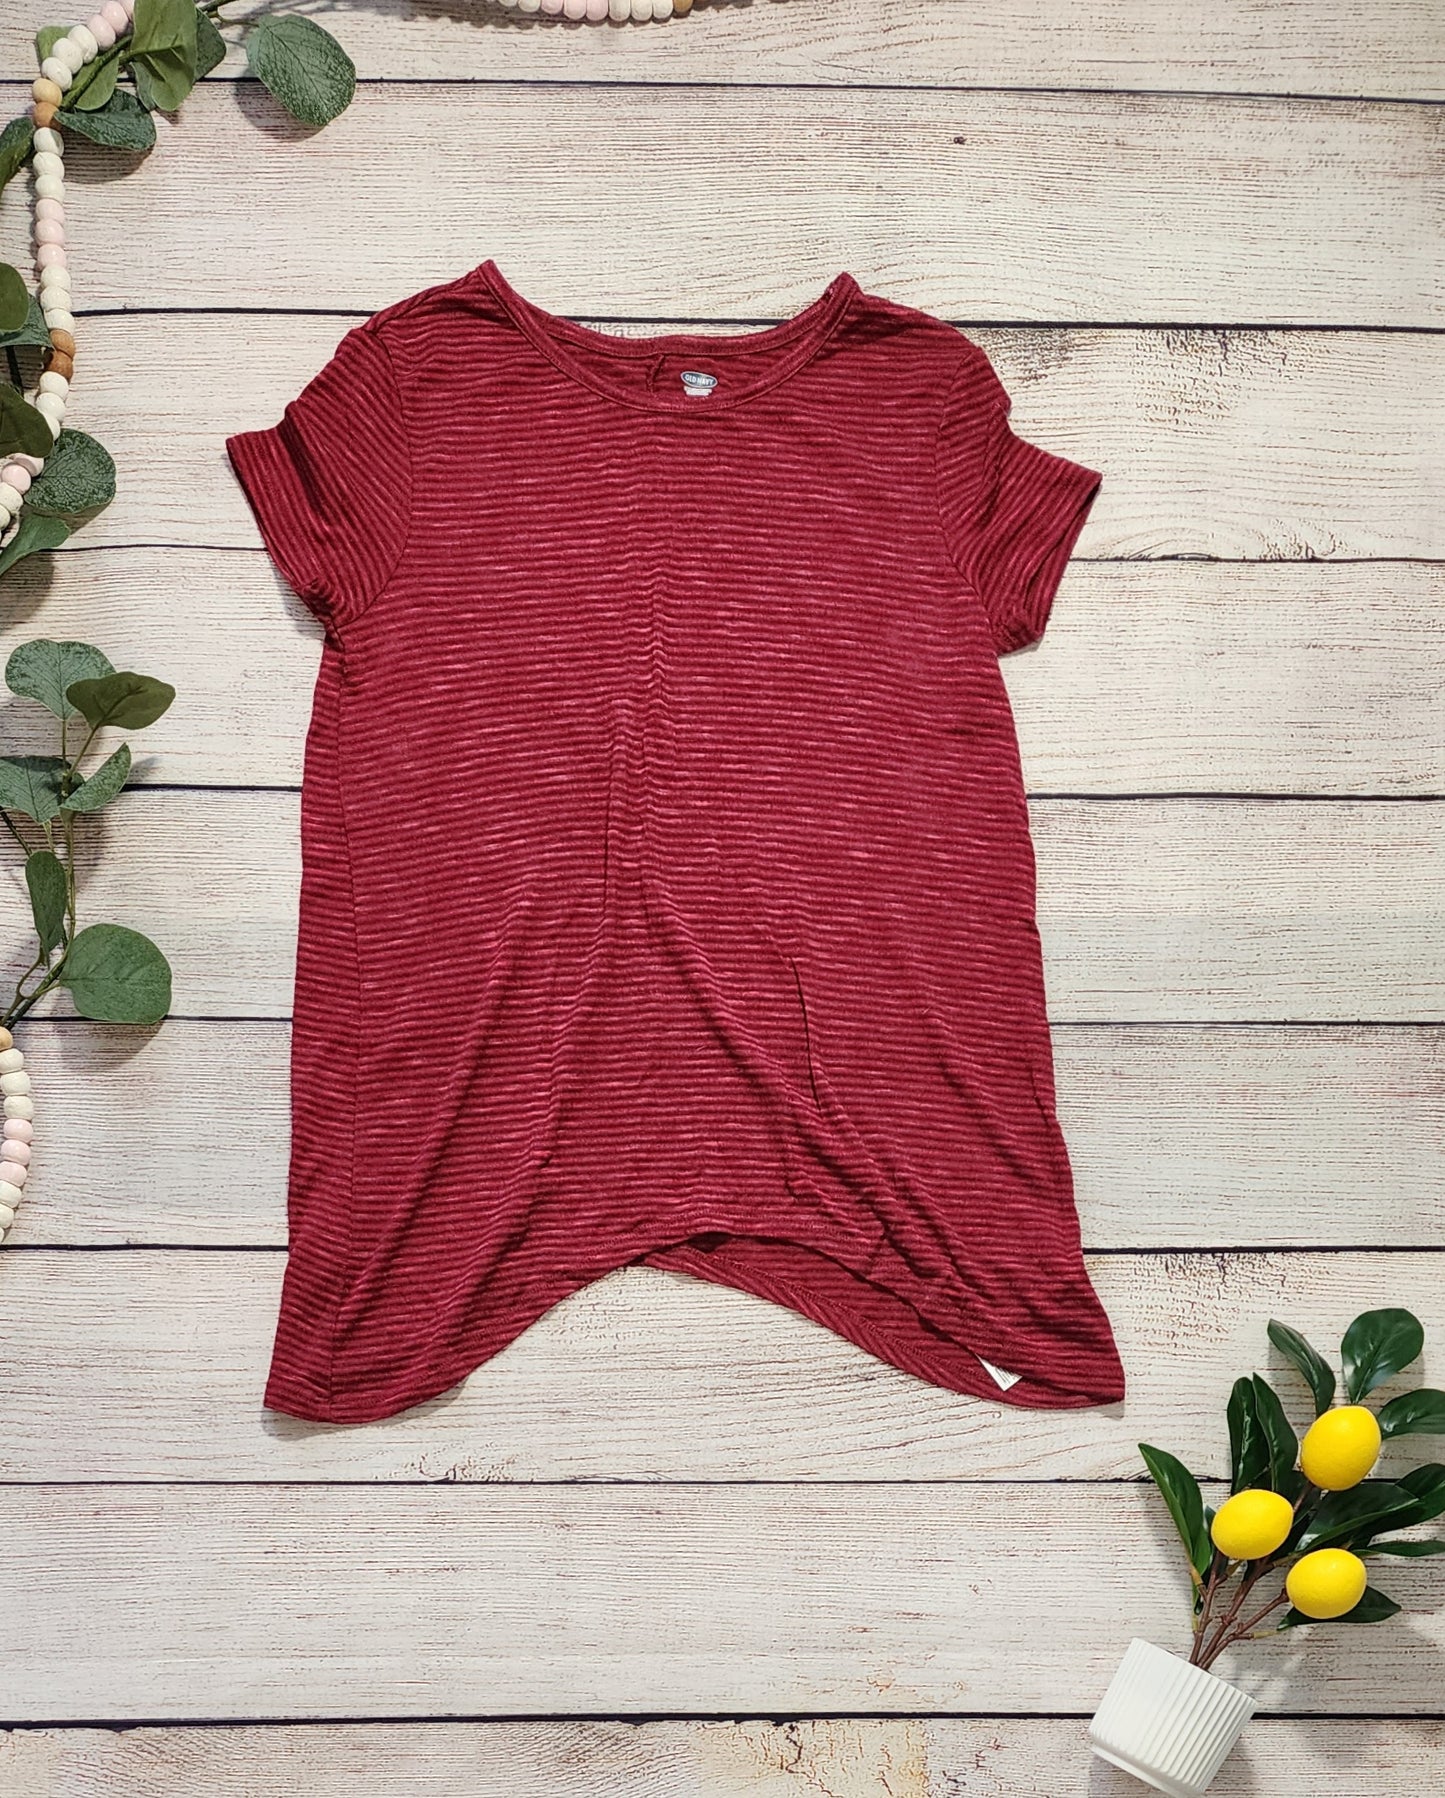 Old Navy Top, Size 10/12